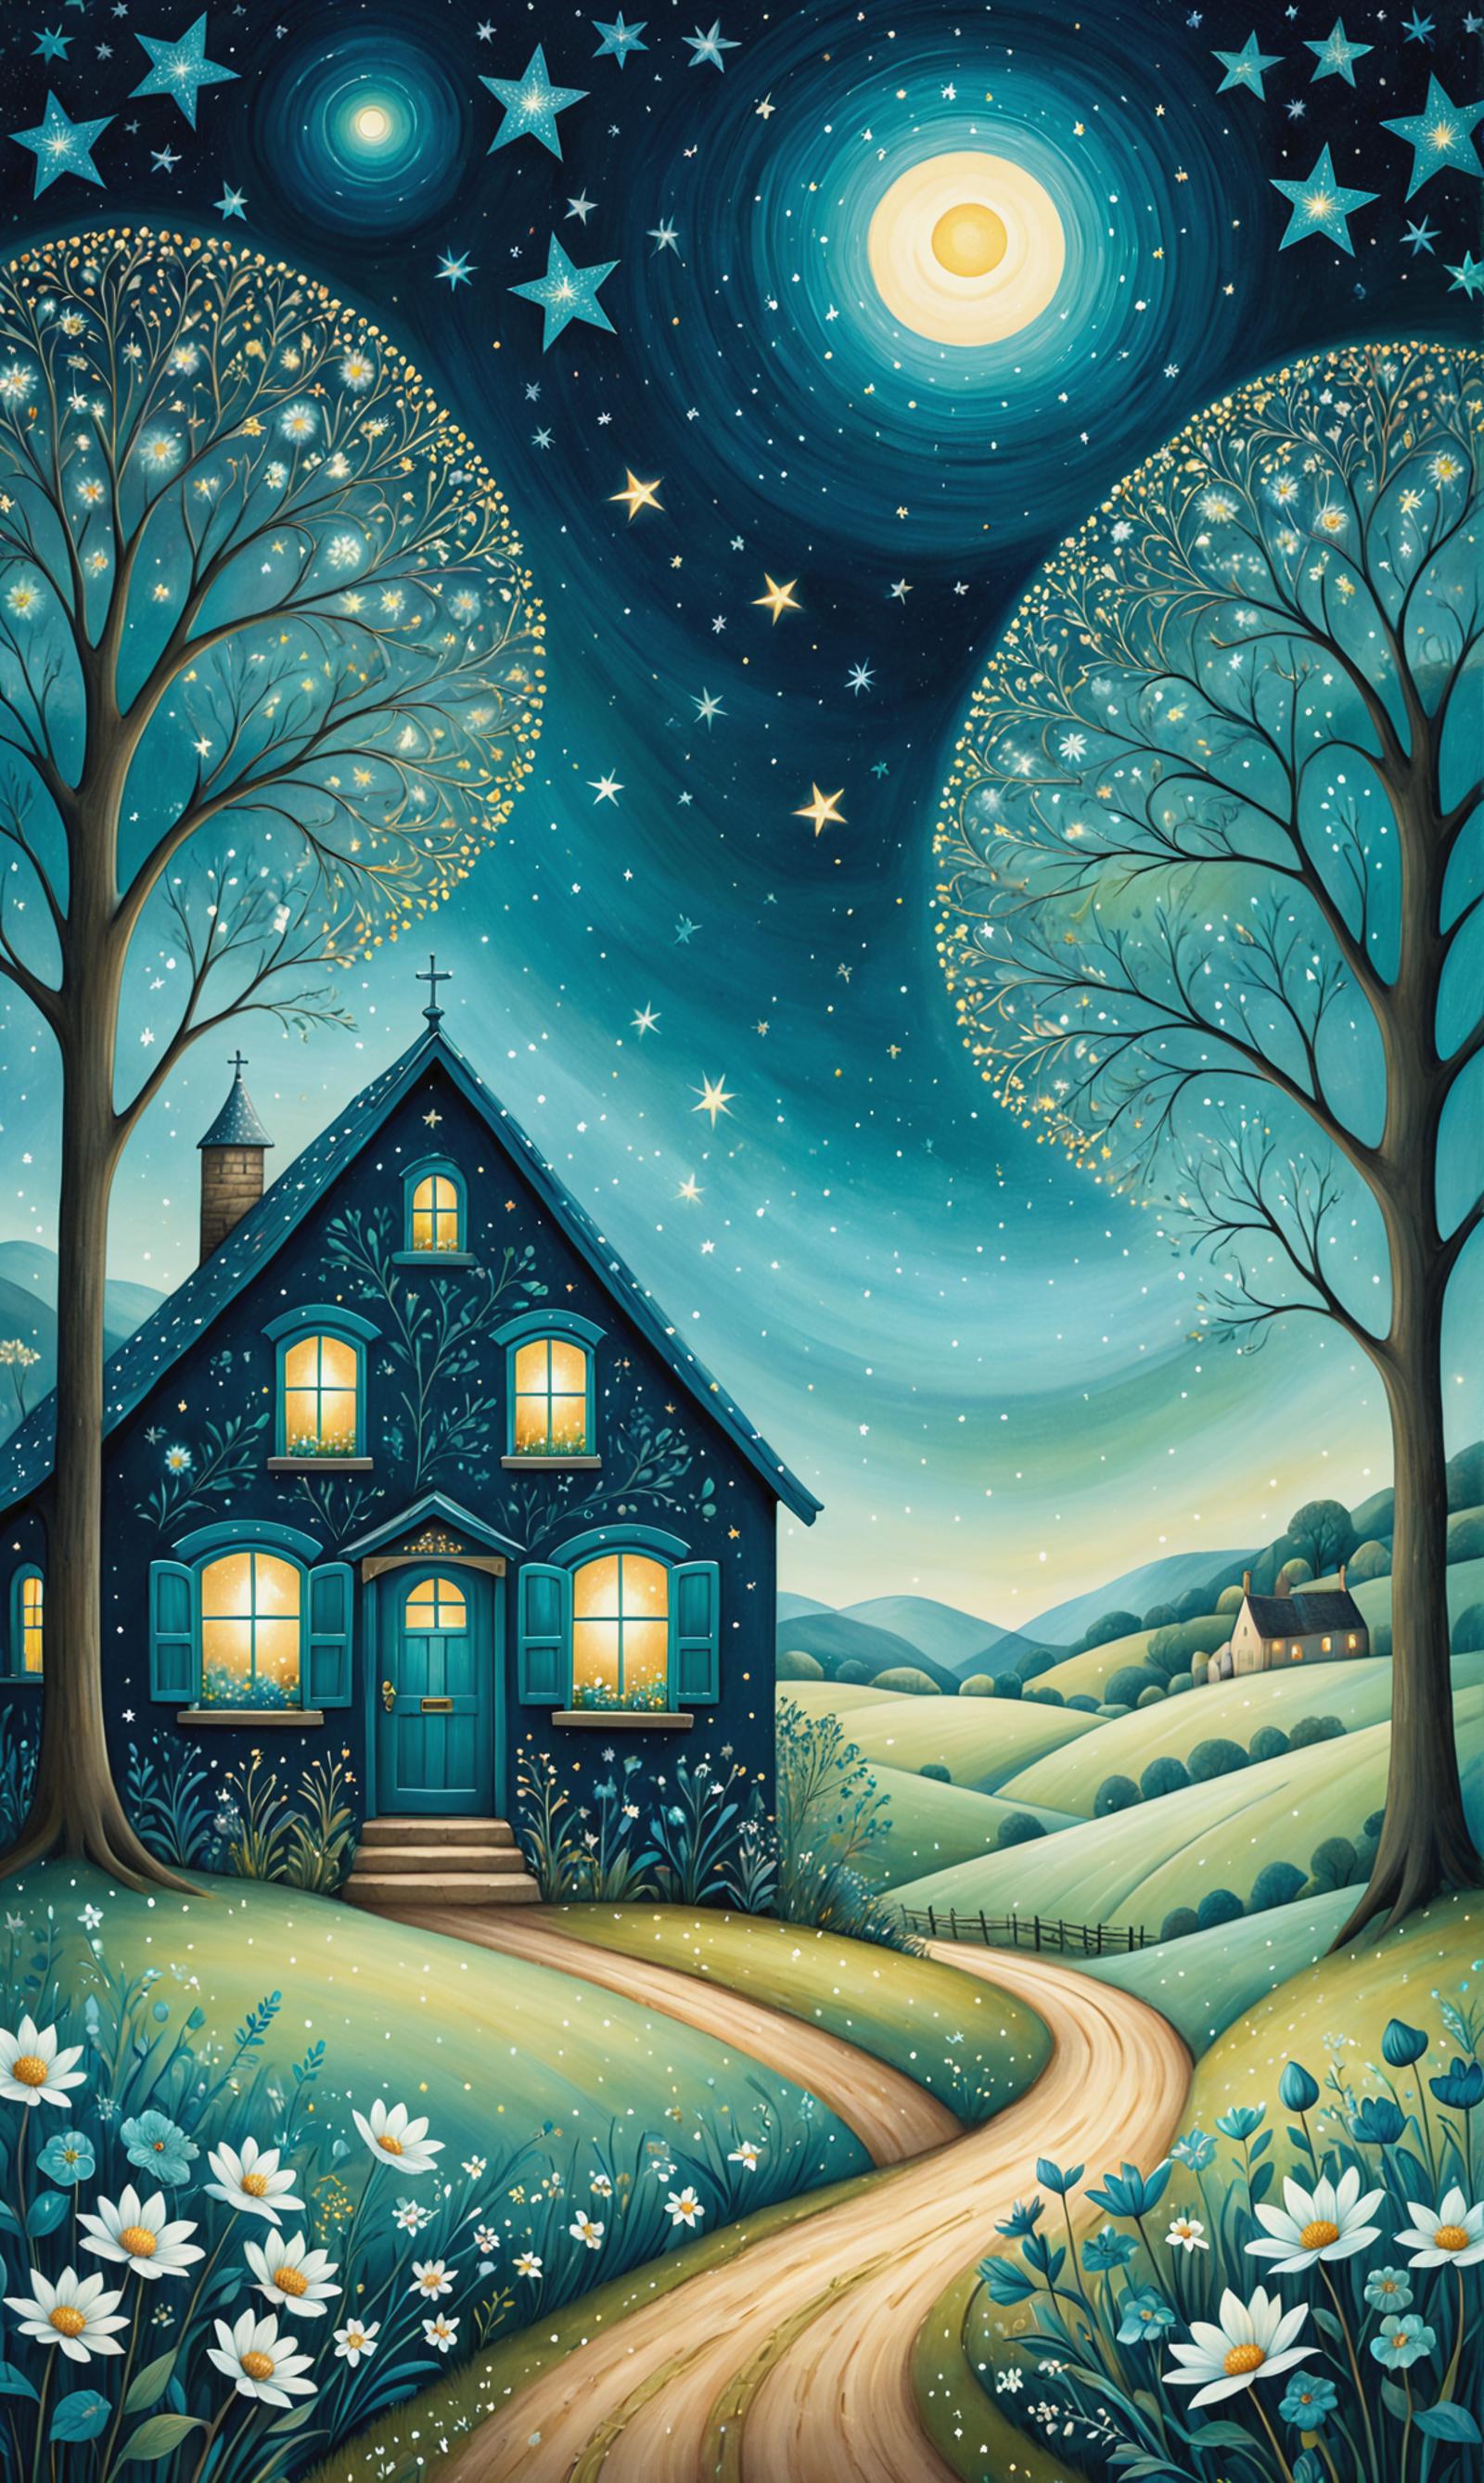 A painting of a blue house with a starry night sky and trees in front of it, with a lit doorway.